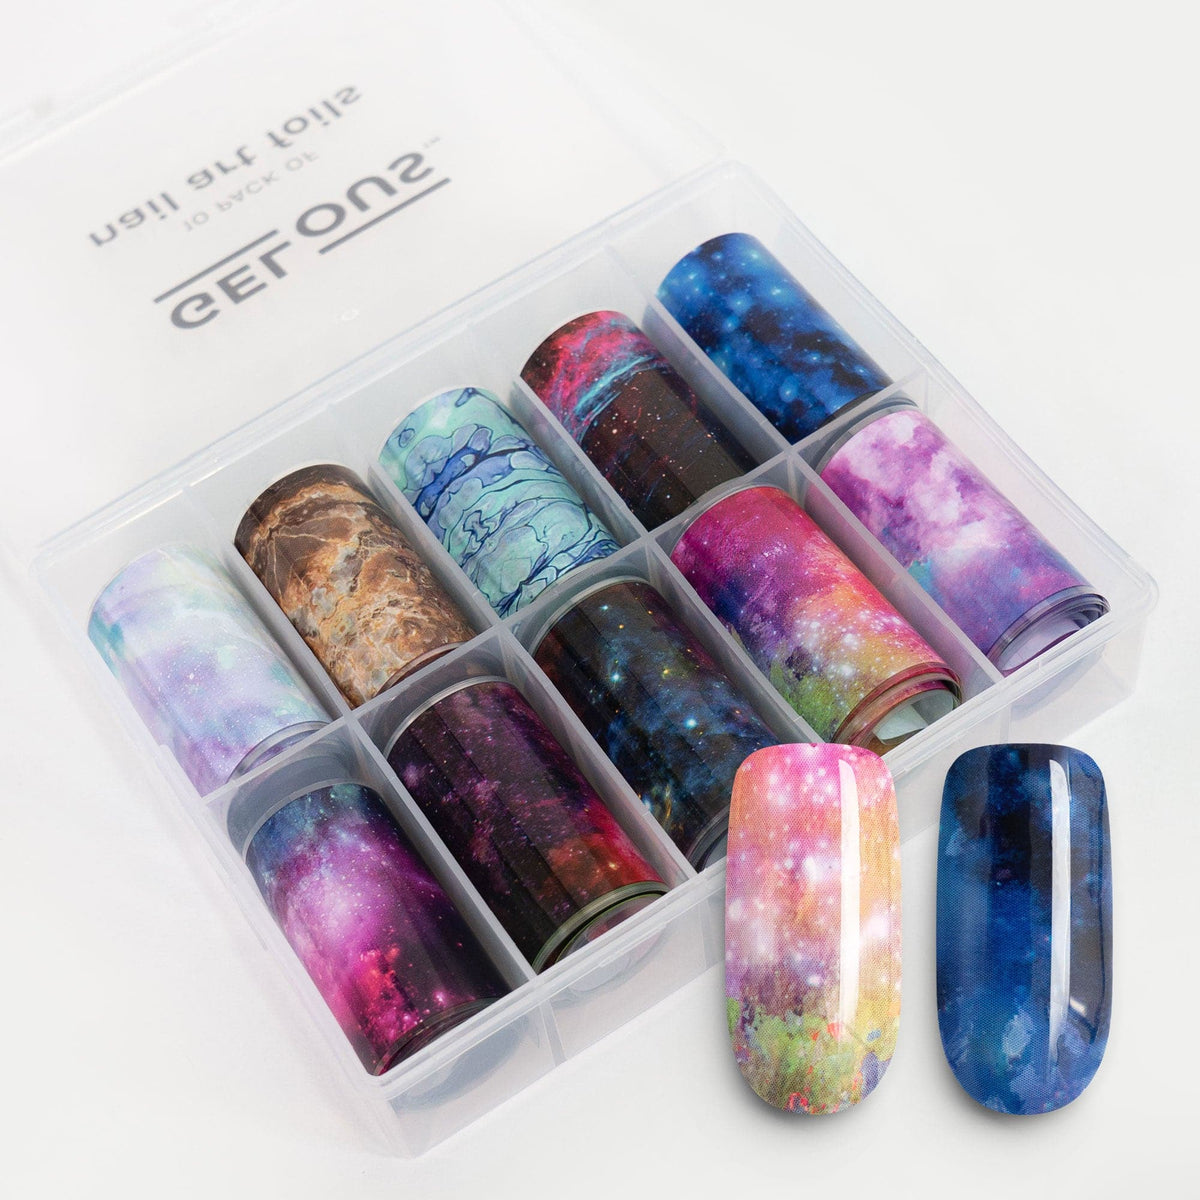 Gelous Cosmic Nail Art Foils product photo - photographed in New Zealand